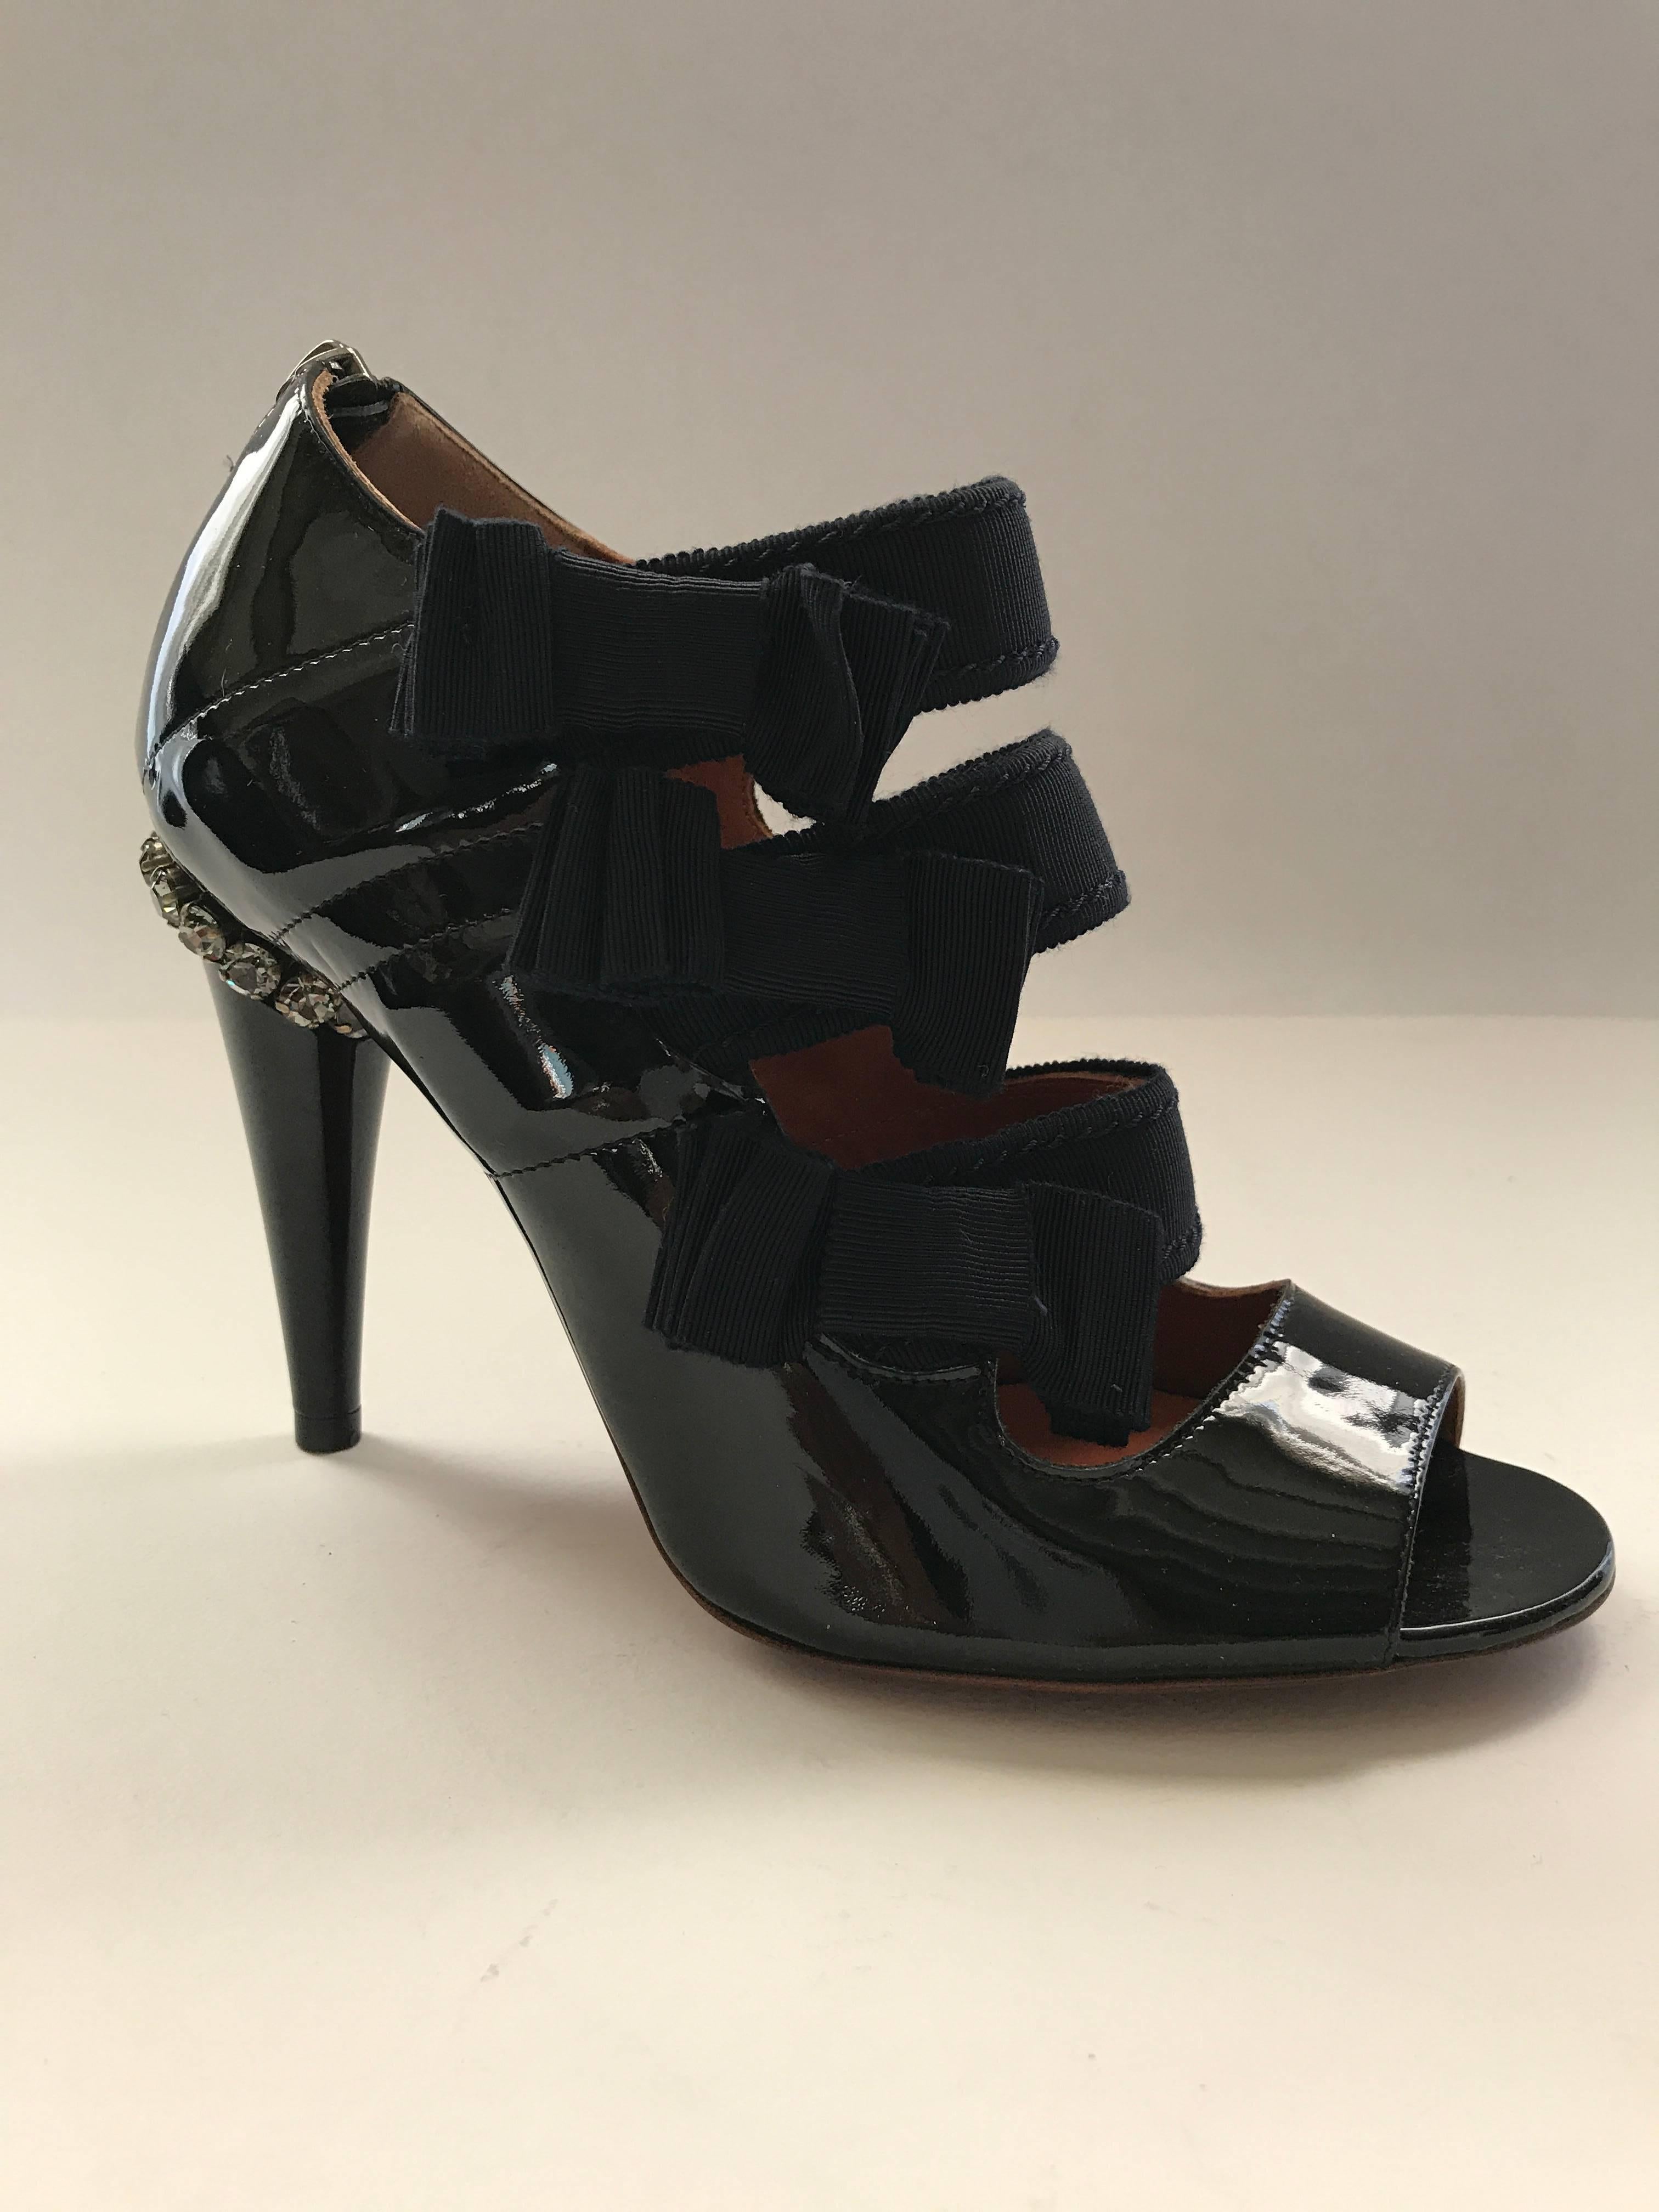 Amazing Lanvin sandal booties in black patent leather from the 2009 summer collection. The three inch wide grosgrain straps are embellish by flat bows on the sides. The 4 inches cone heel is encircled at the top by a row of pewter crystals. The shoe